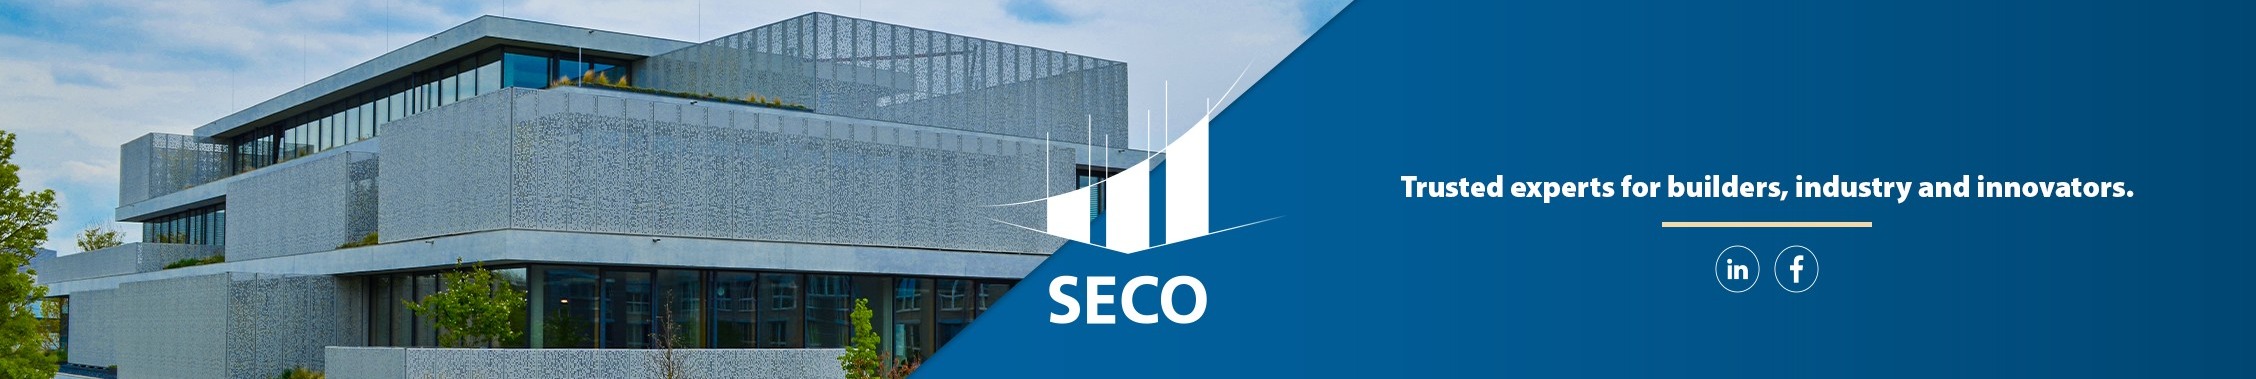 SECO Luxembourg background